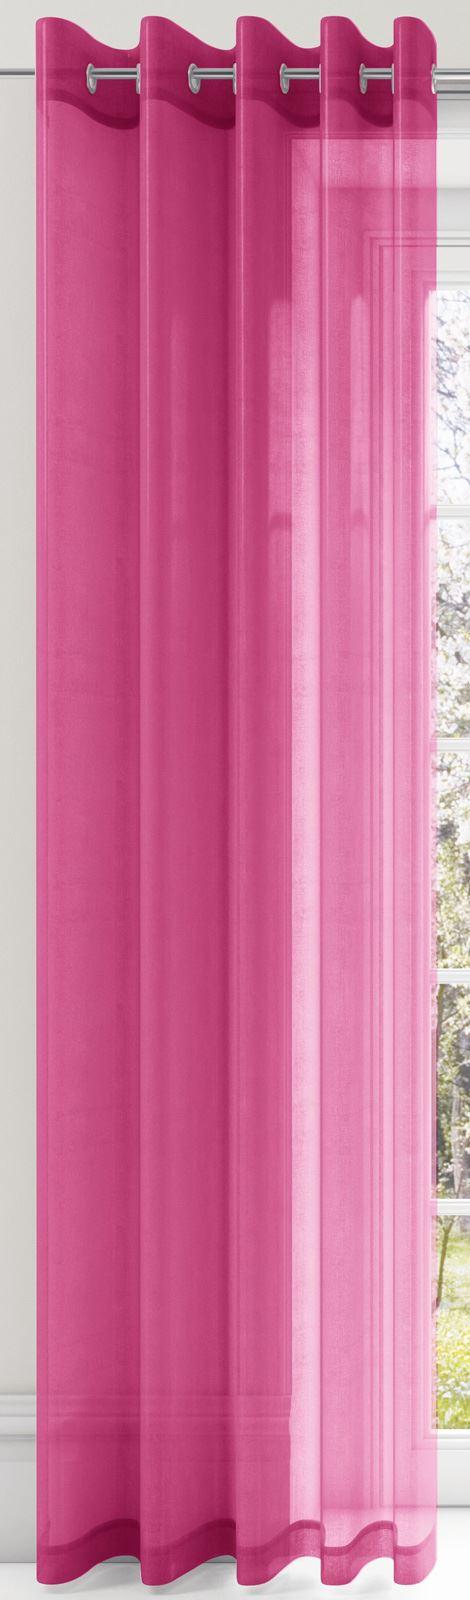 Voile Ring Top Panel Cerise 59" x 108" - Ideal